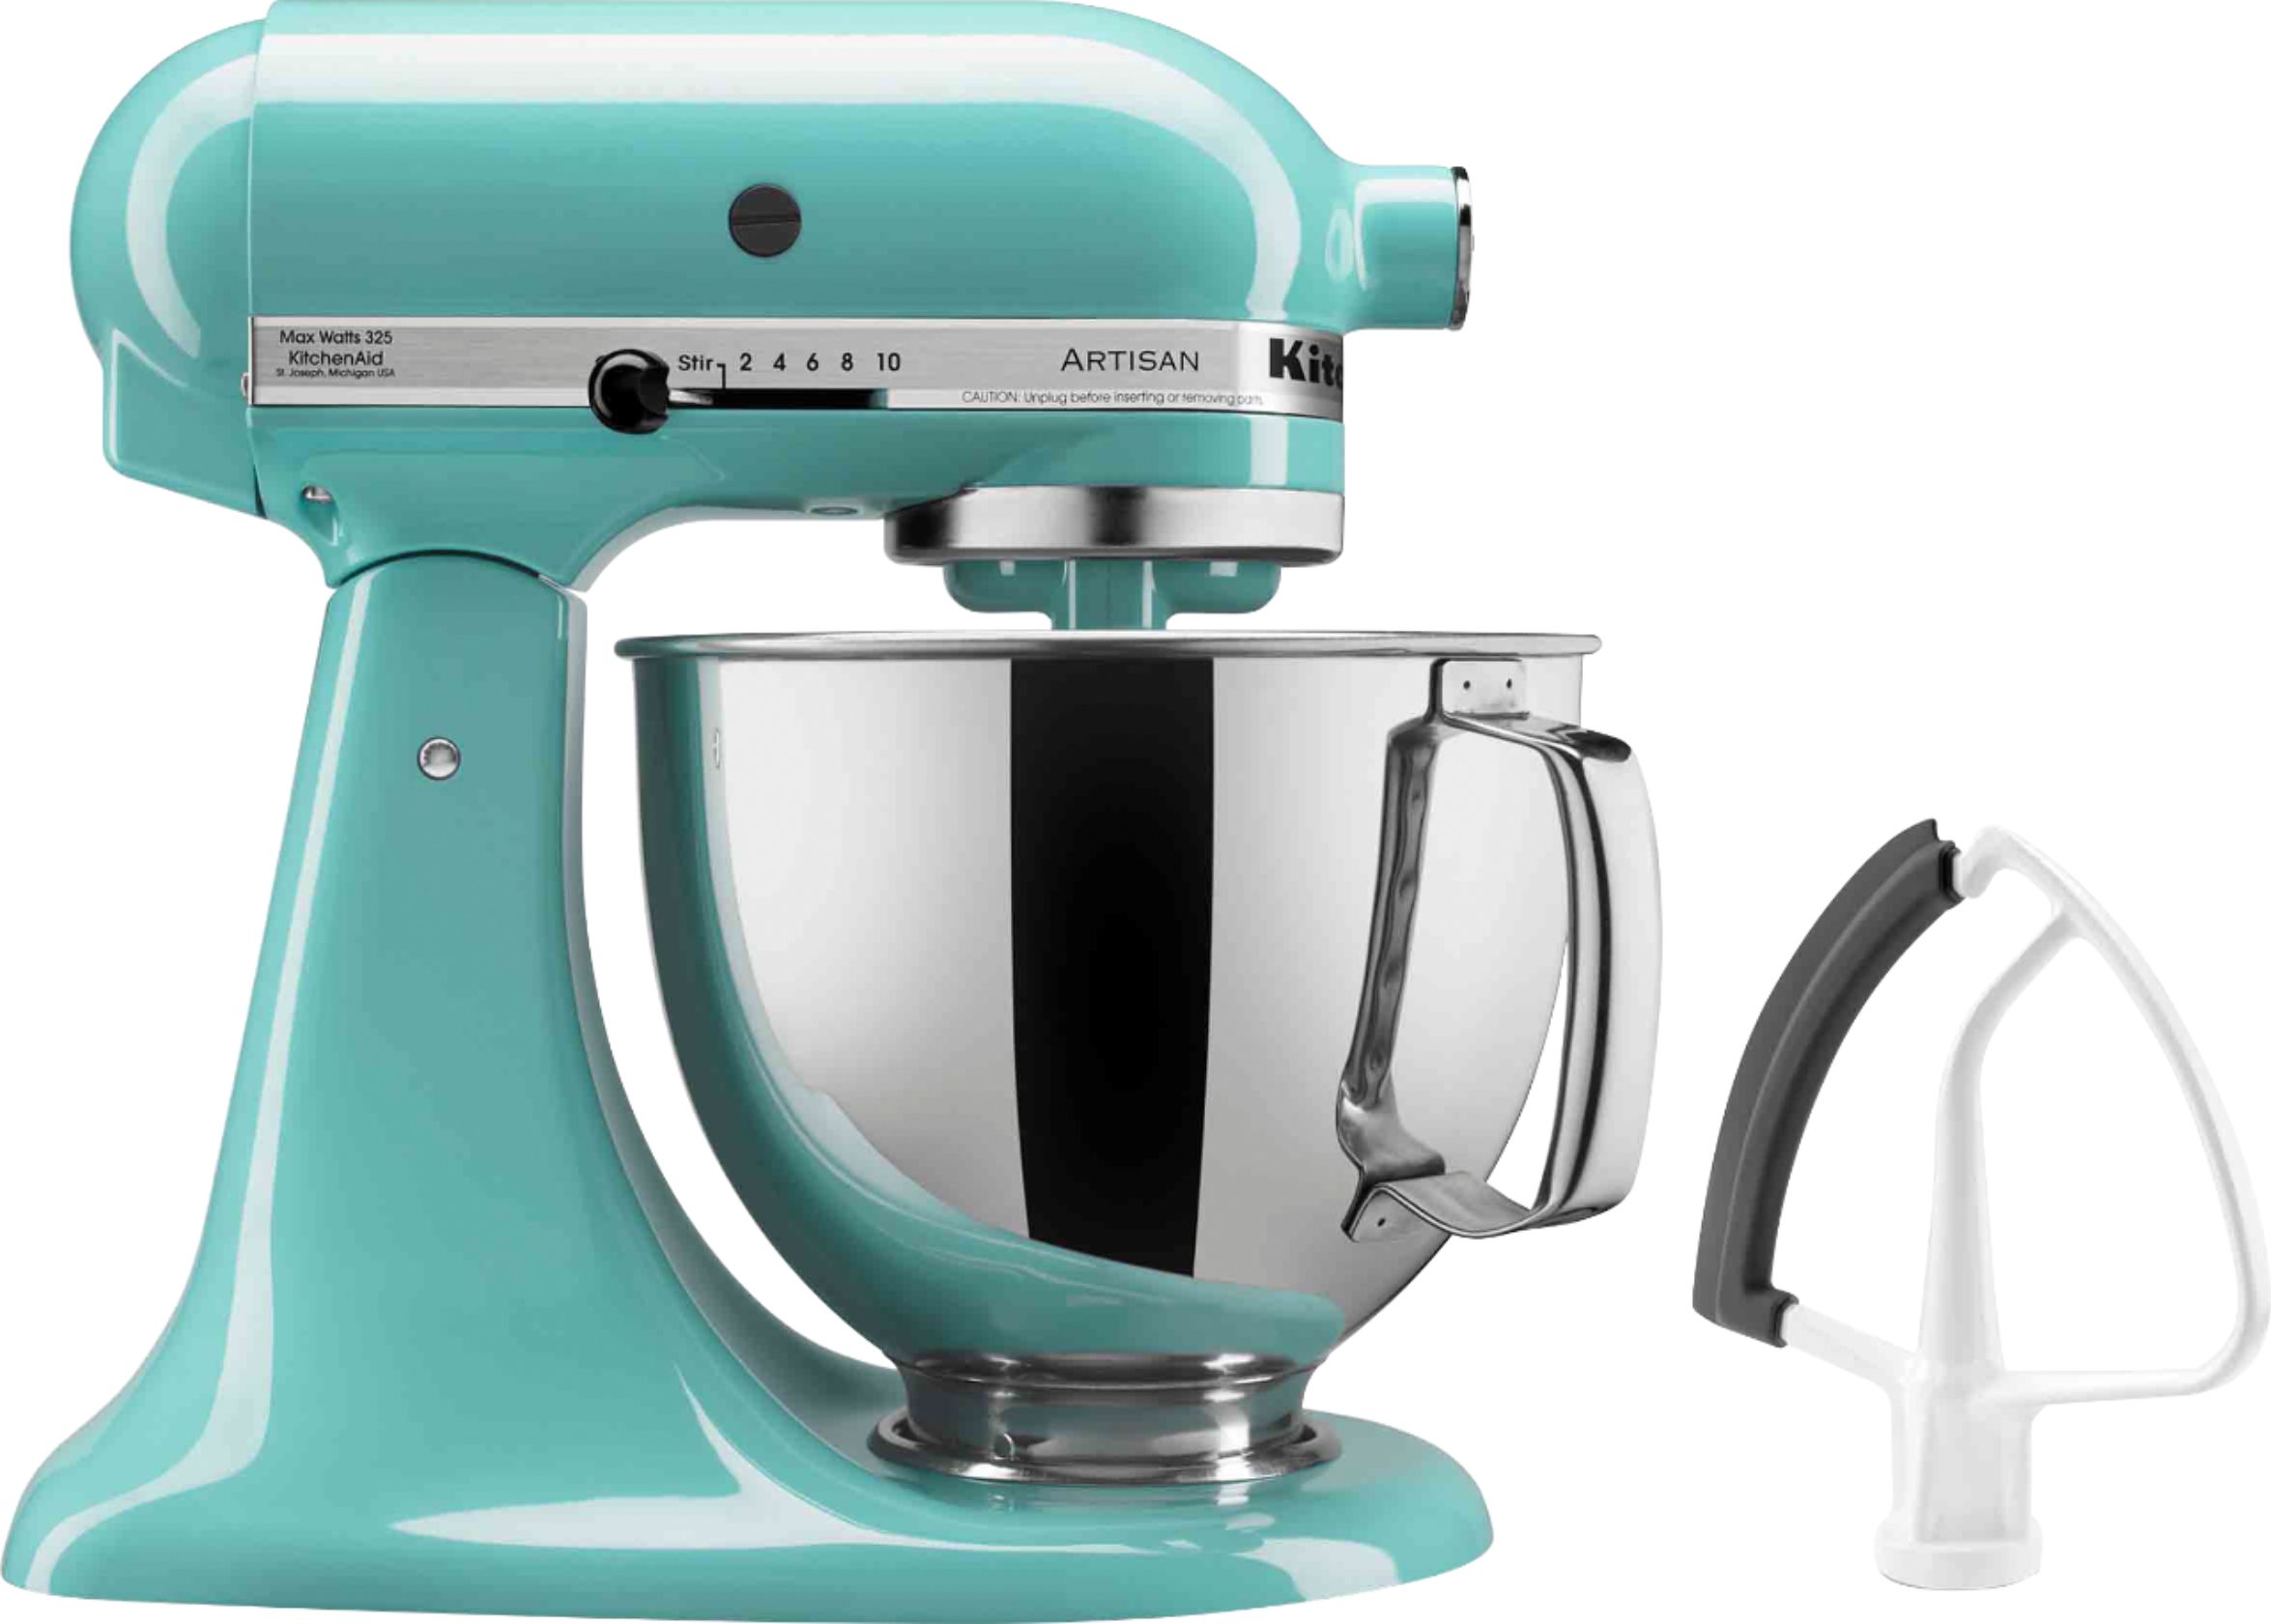 Stand Mixer Cover compatible with Kitchenaid Mixer, Fits All Tilt Head &  Bowl Lift Models,The Fabric Is Pure Cottot,Fine, Soft, Not Easy to Fade,  Not